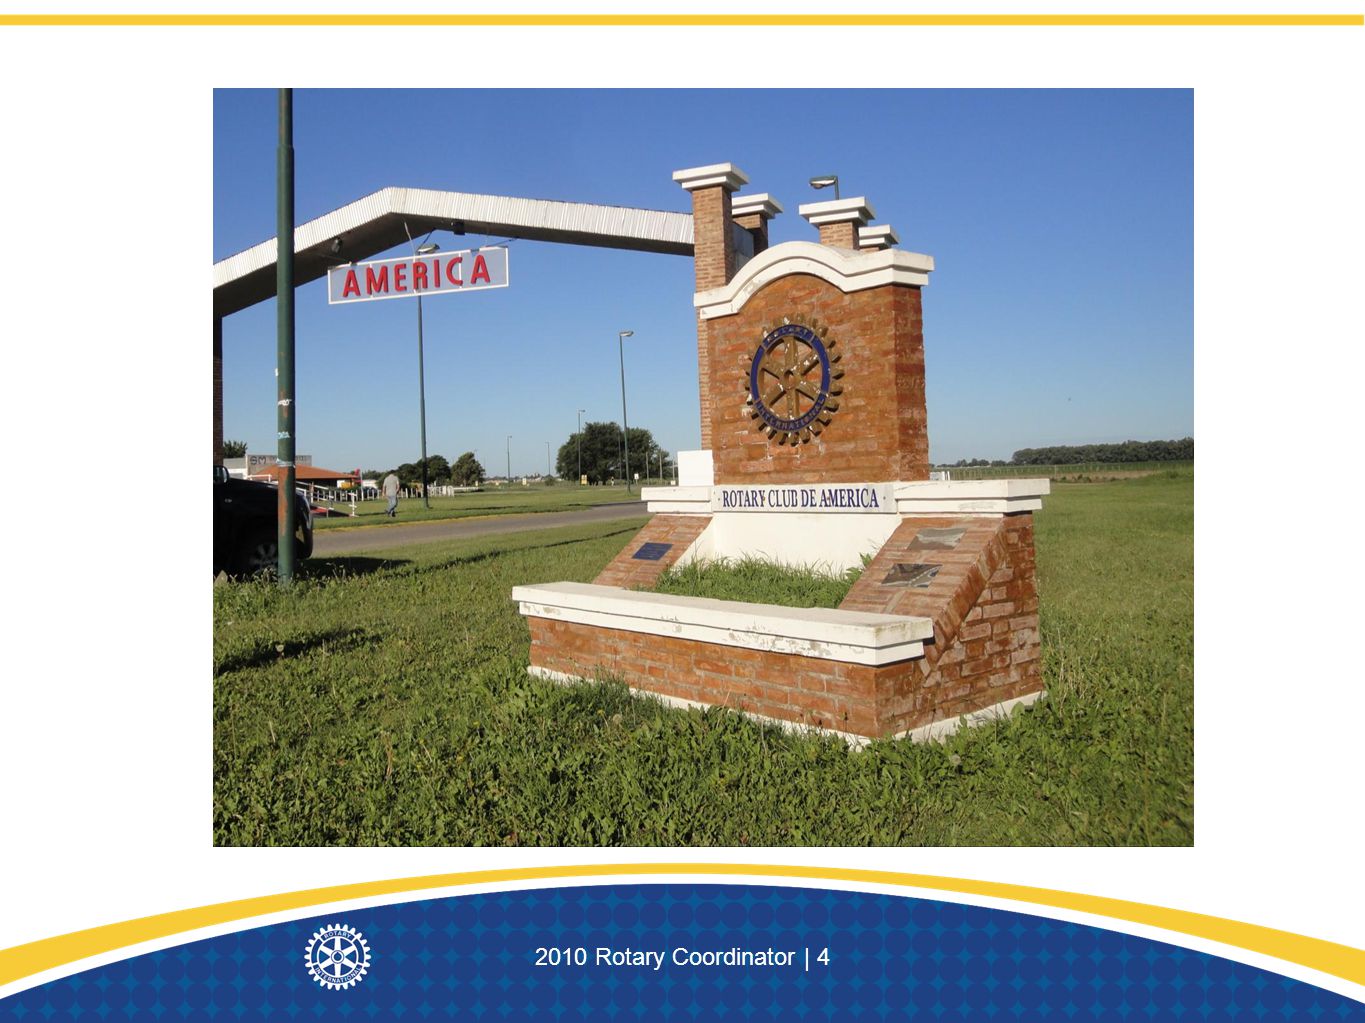 This Rotary monument stands when you entert the town of America in Argentina.